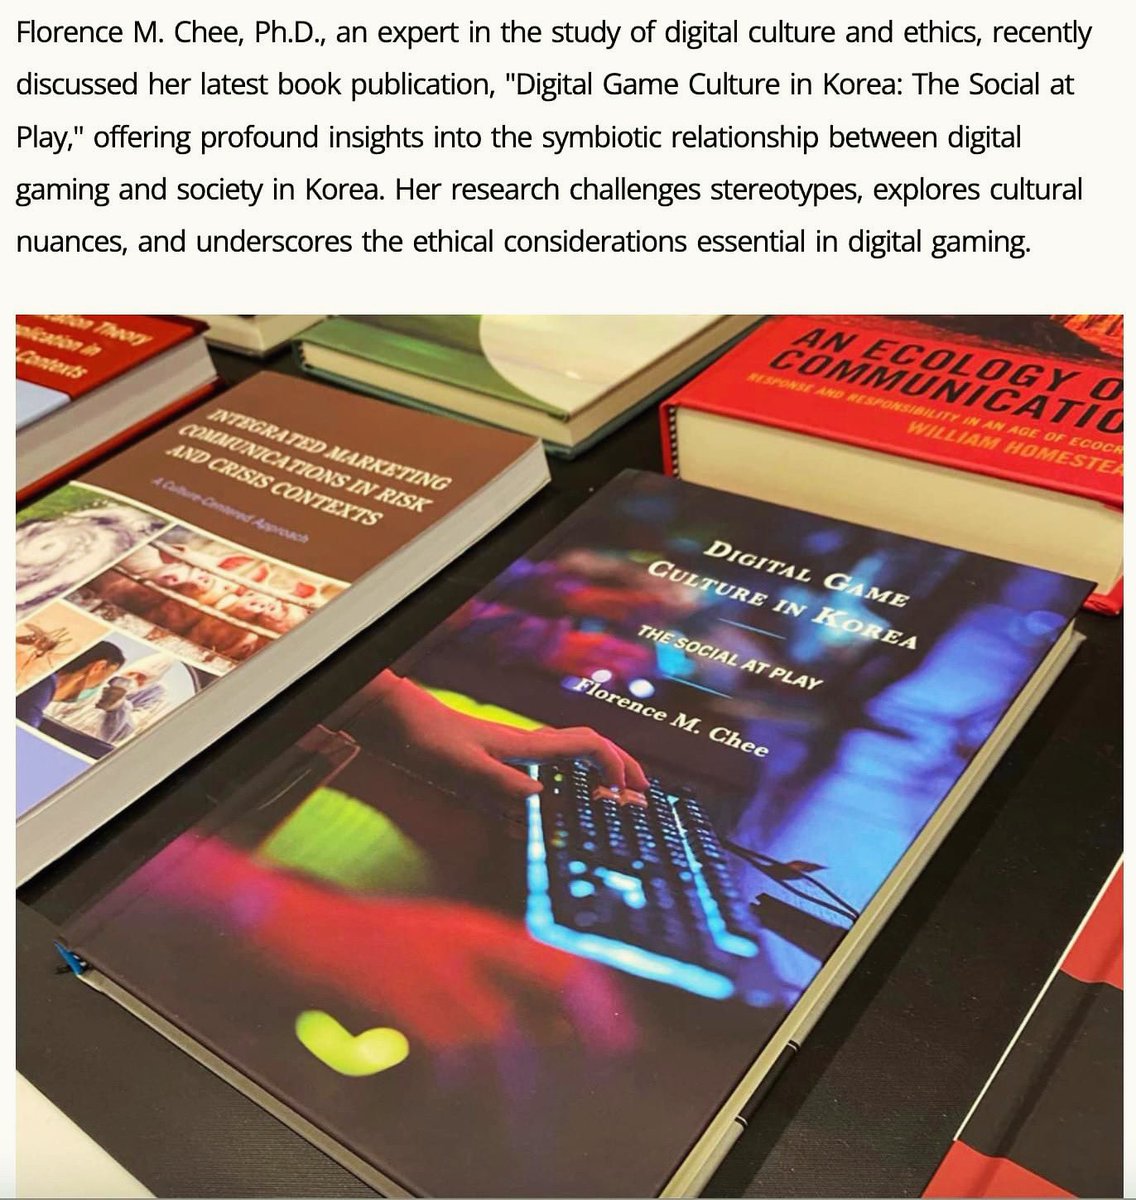 Sunday edition! Please enjoy a double-feature, including an interview with @SIMLabChicago Director @cheeflo about her book Digital Game Culture in Korea AND a promotion of this Thursday's Symposium by @digethics @LoyolaChicago! Thank you, @Loyola_SOC! luc.edu/soc/stories/20…